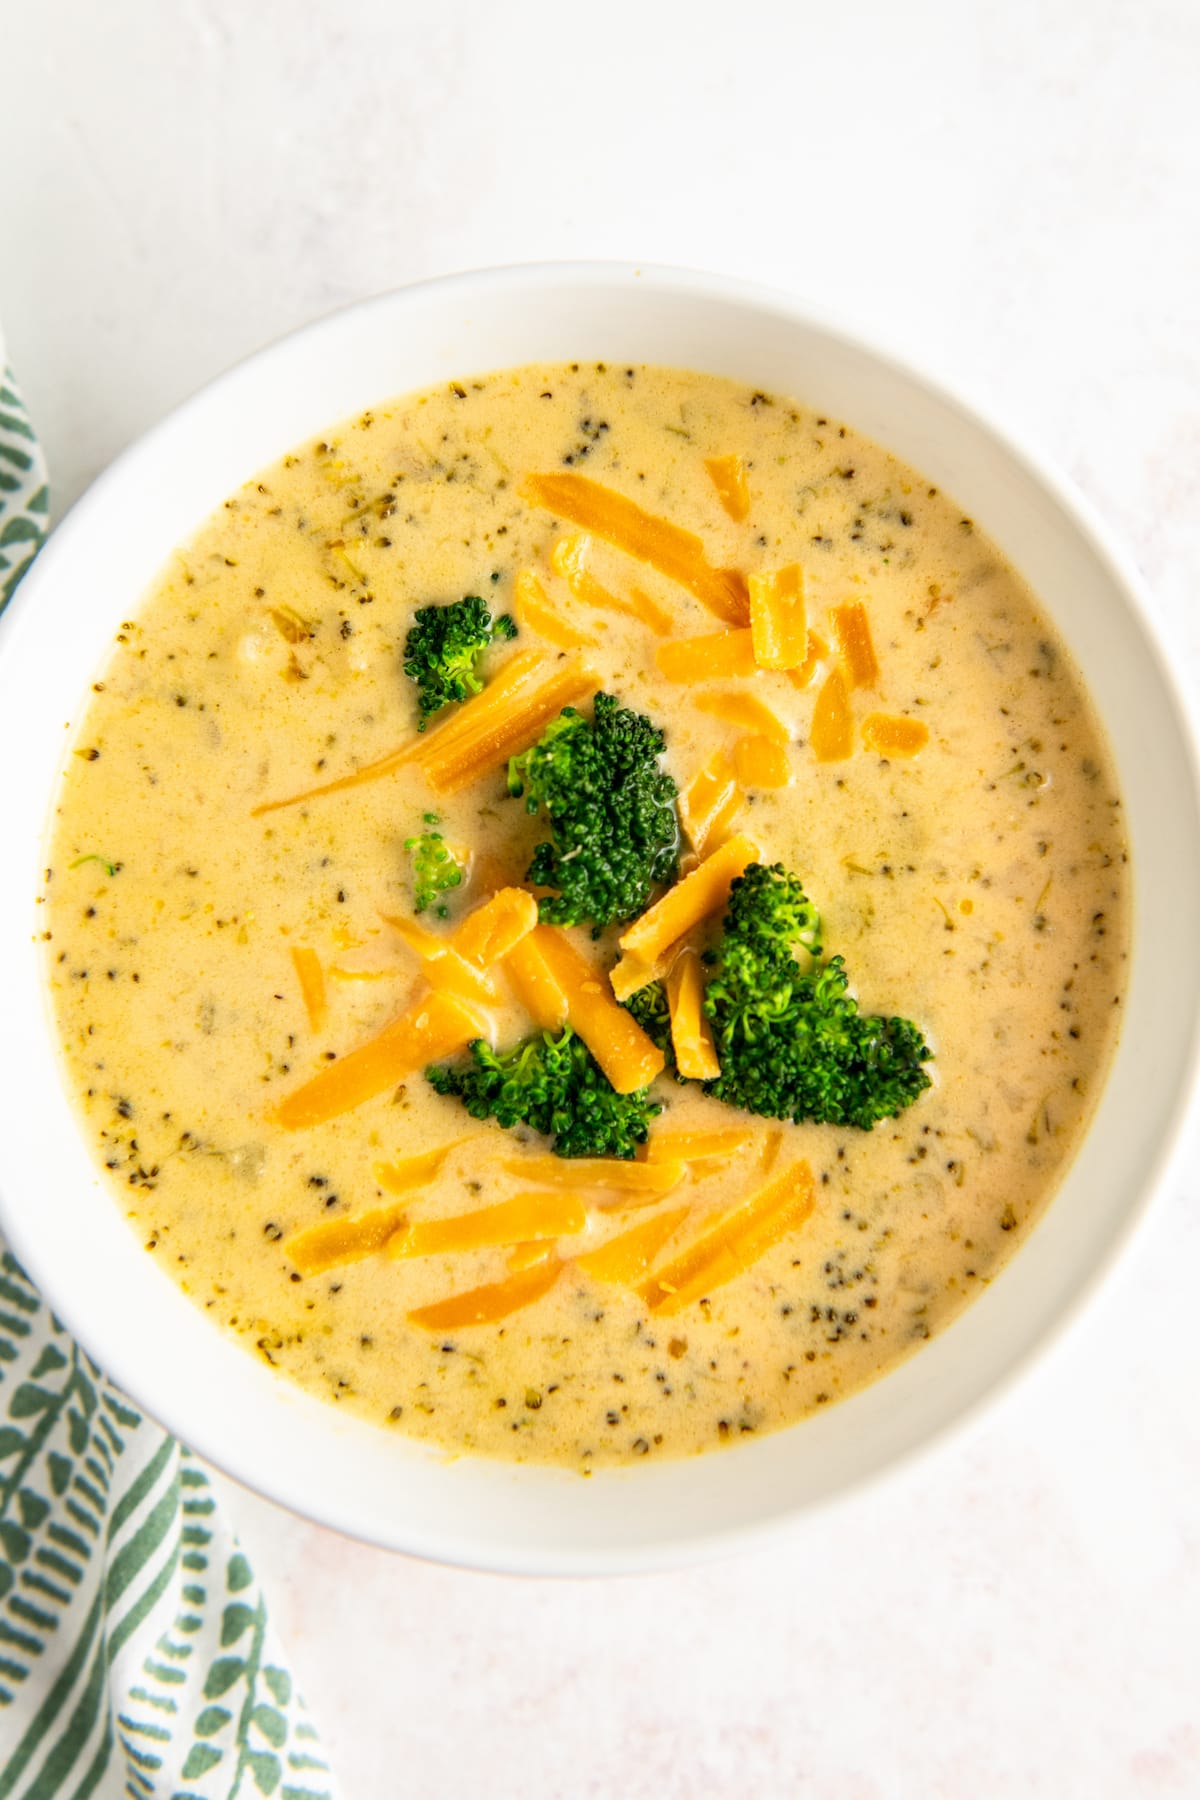 Overhead shot of crockpot broccoli cheese soup served in a white bowl.